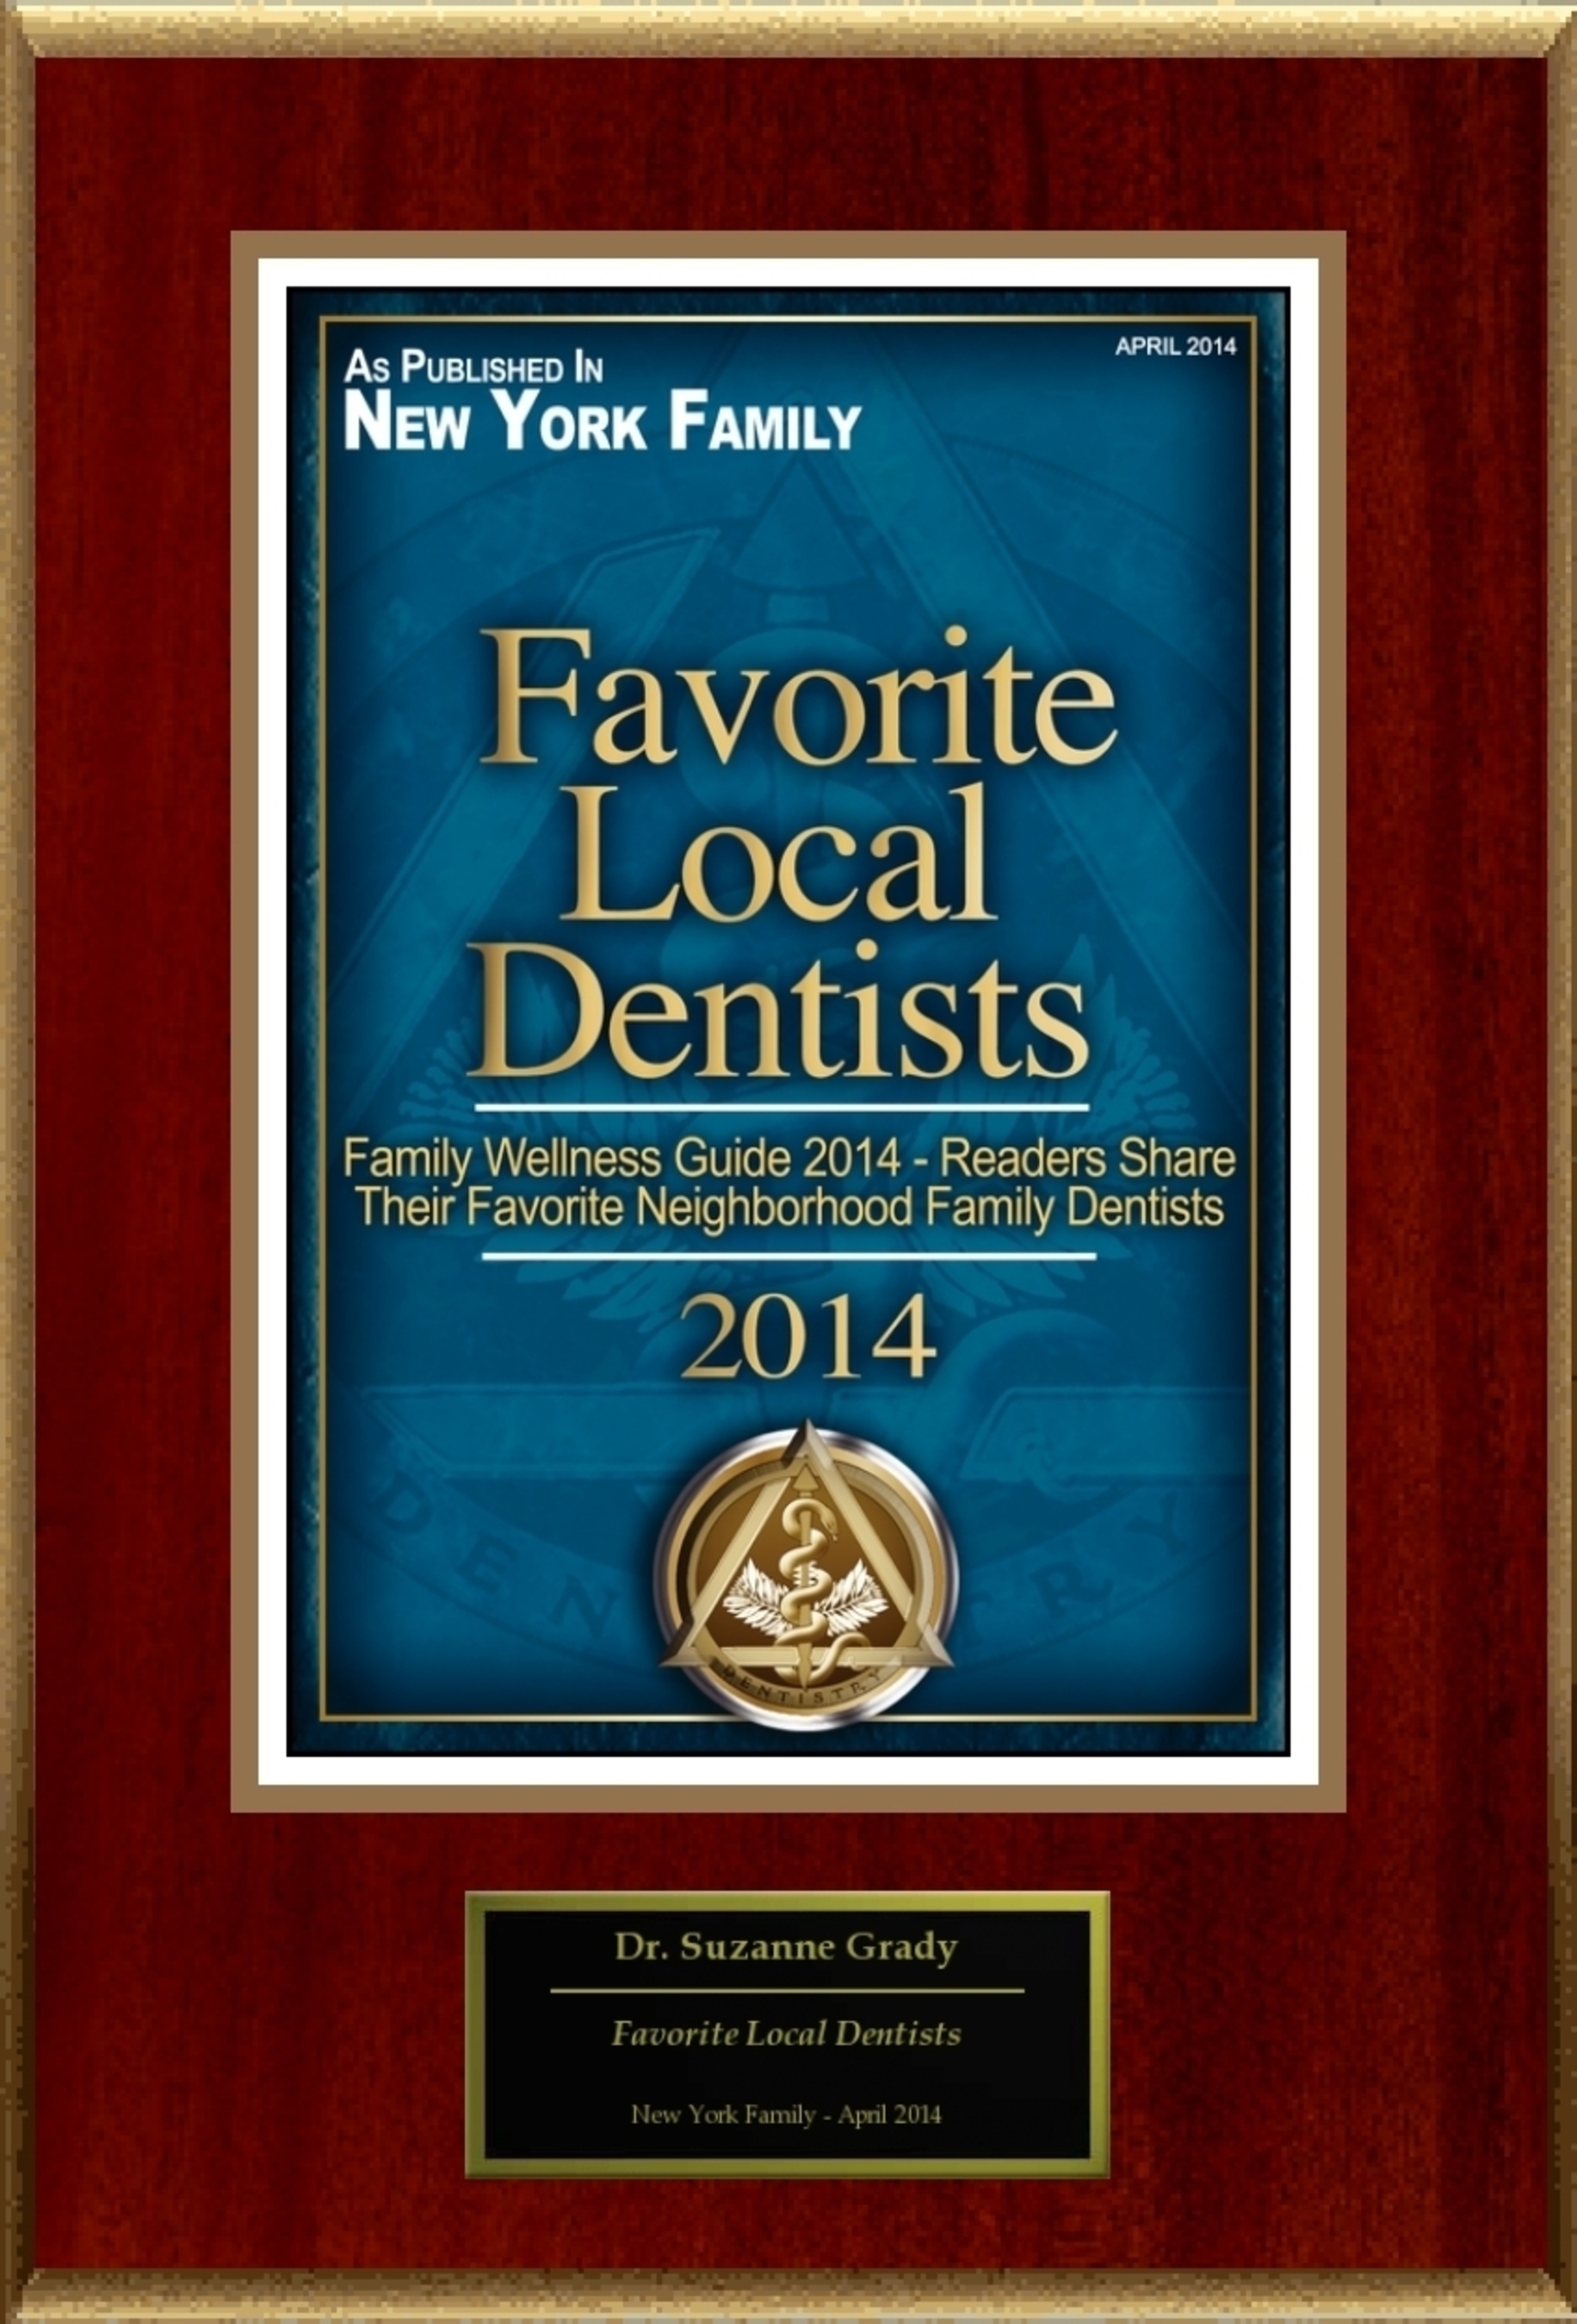 Dr. Suzanne Grady Selected For "Favorite Local Dentists" (PRNewsFoto/American Registry)